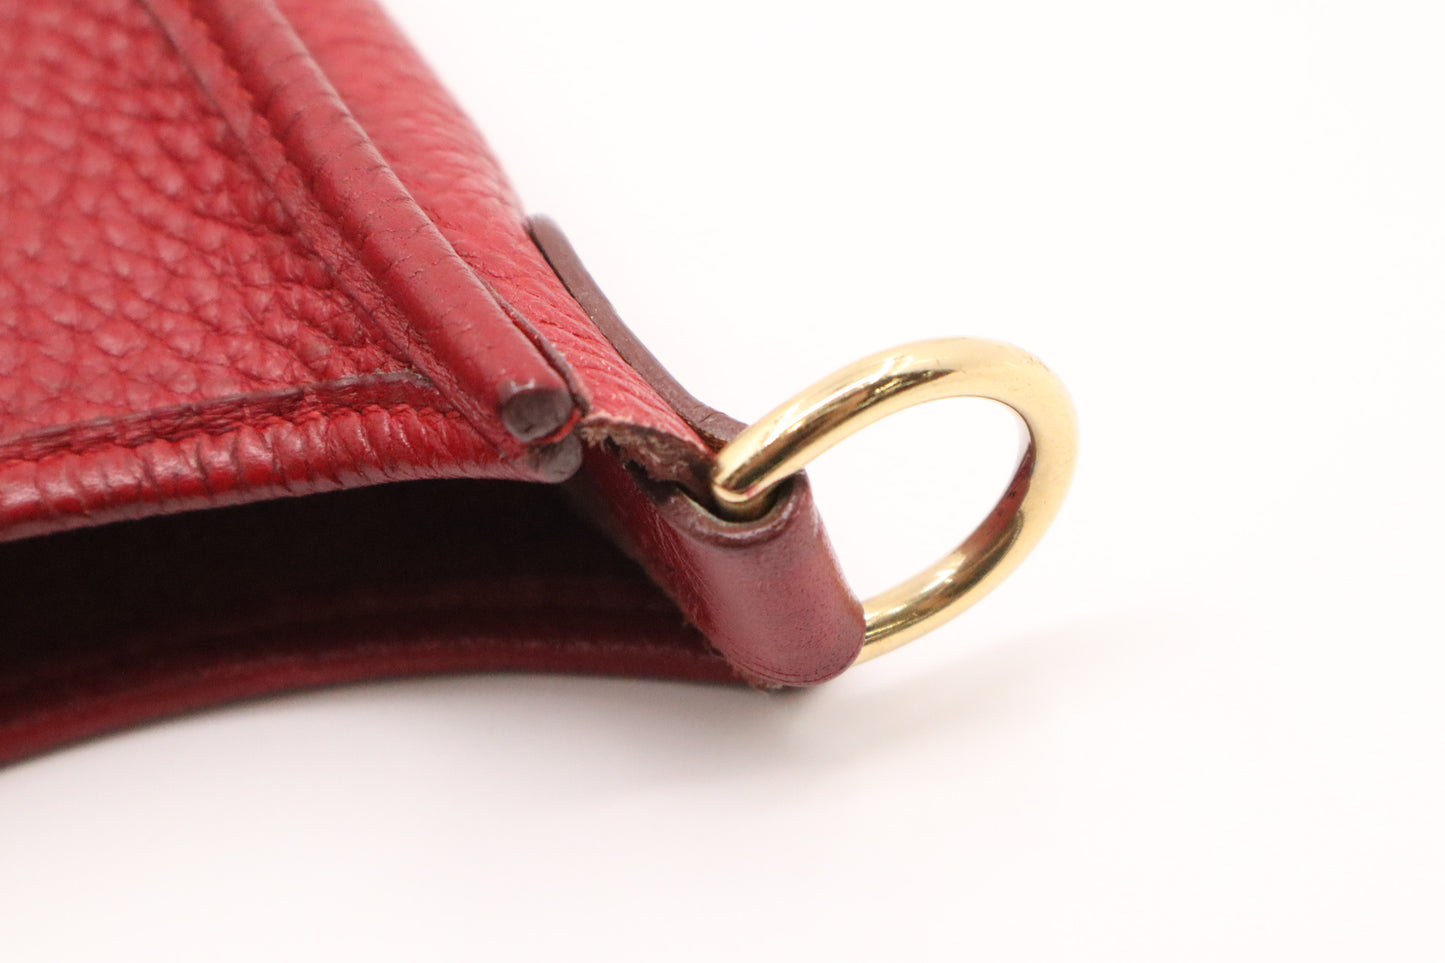 Hermes Evelyne GM in Red Leather